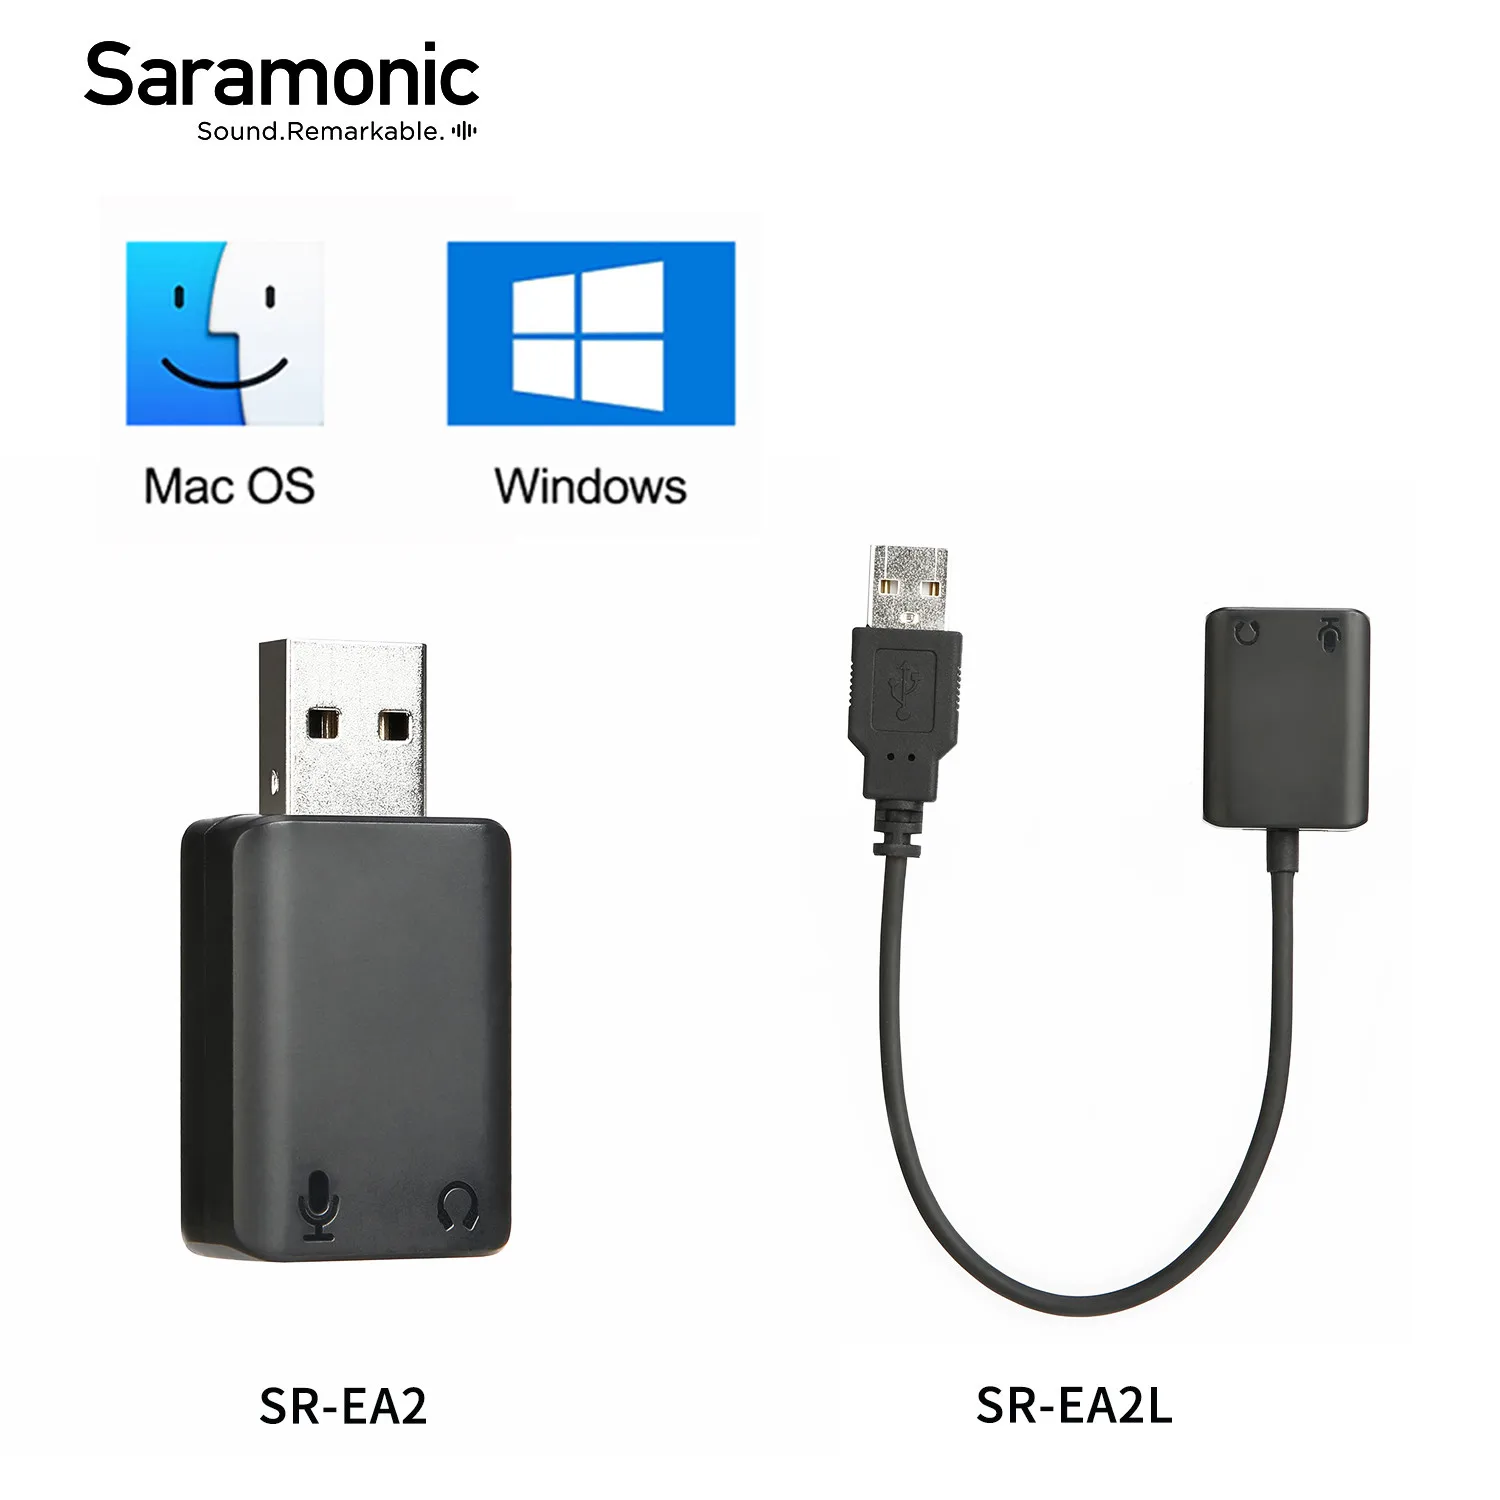 

Saramonic SR-EA2/EA2L Mini USB Sound Adapter for USB to 3.5mm Audio&Mic Adapter compatible Computers equipped with USB port